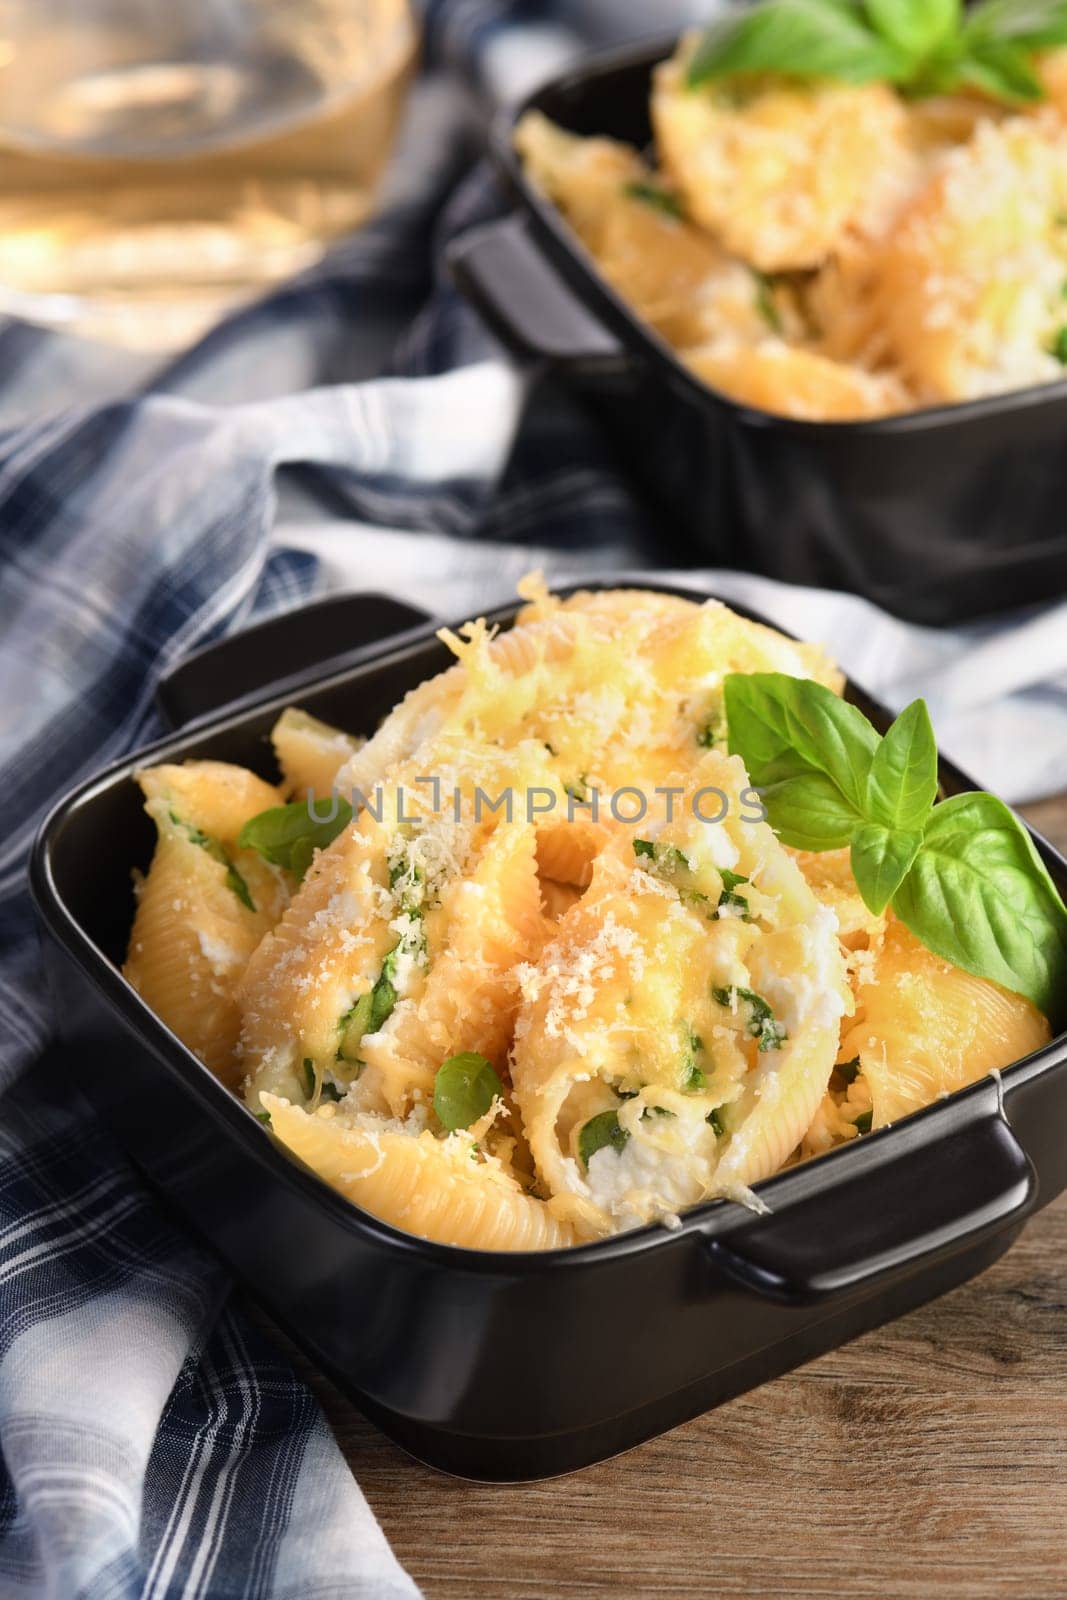 Pasta conchiglioni stuffed with spinach, ricotta and parmesan baked